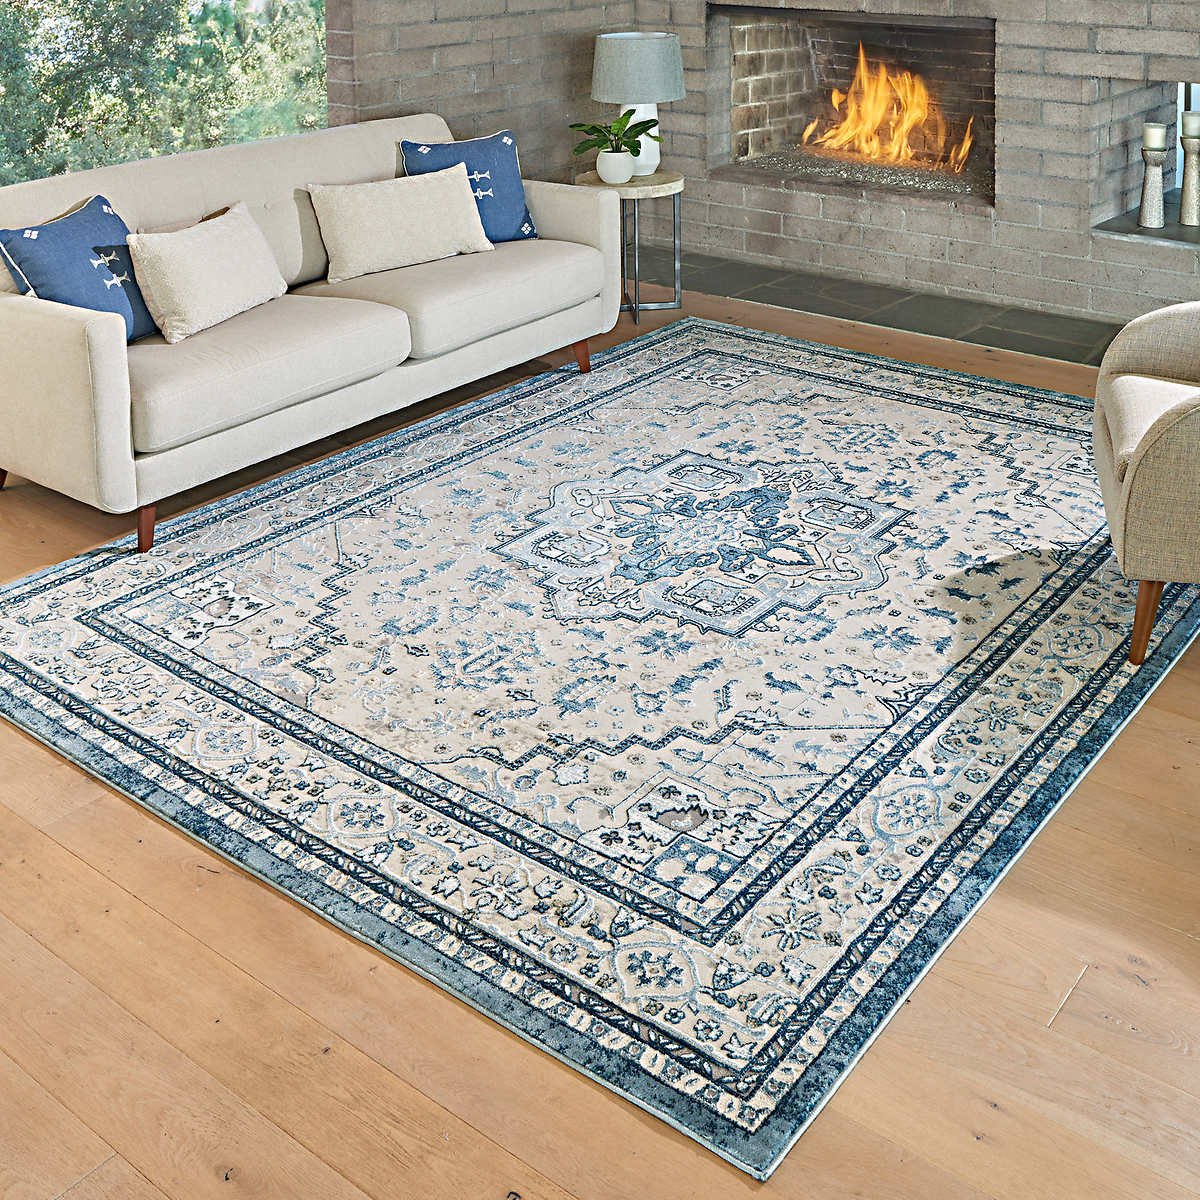 Centenno Area Rug Or Runner Herez Costco, Area Rugs 2×3